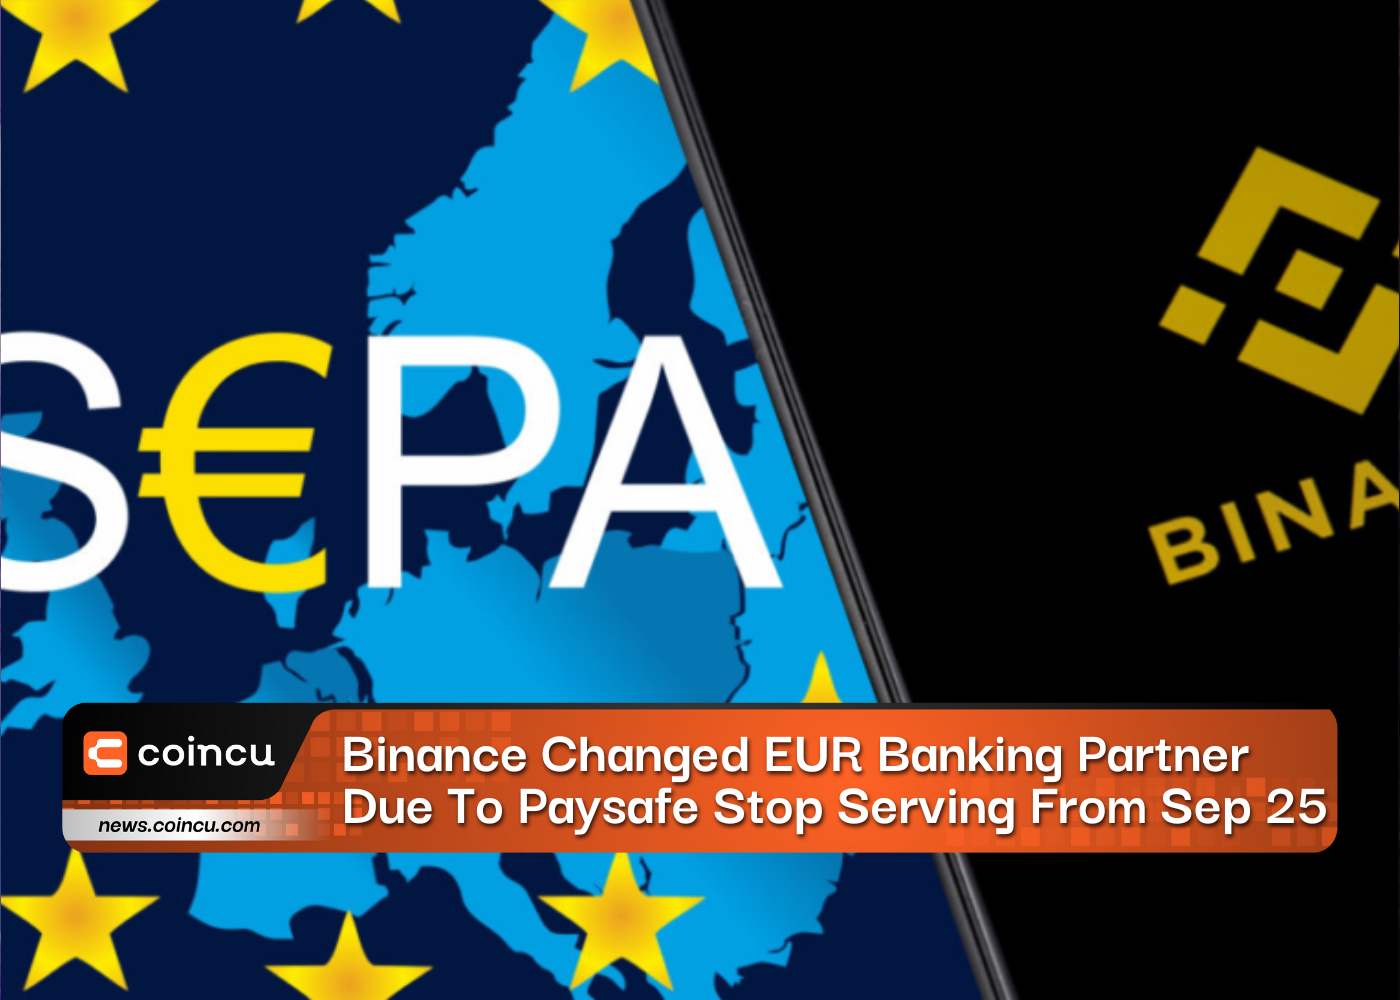 Binance Changed EUR Banking Partner Due To Paysafe Stop Serving From Sep 25